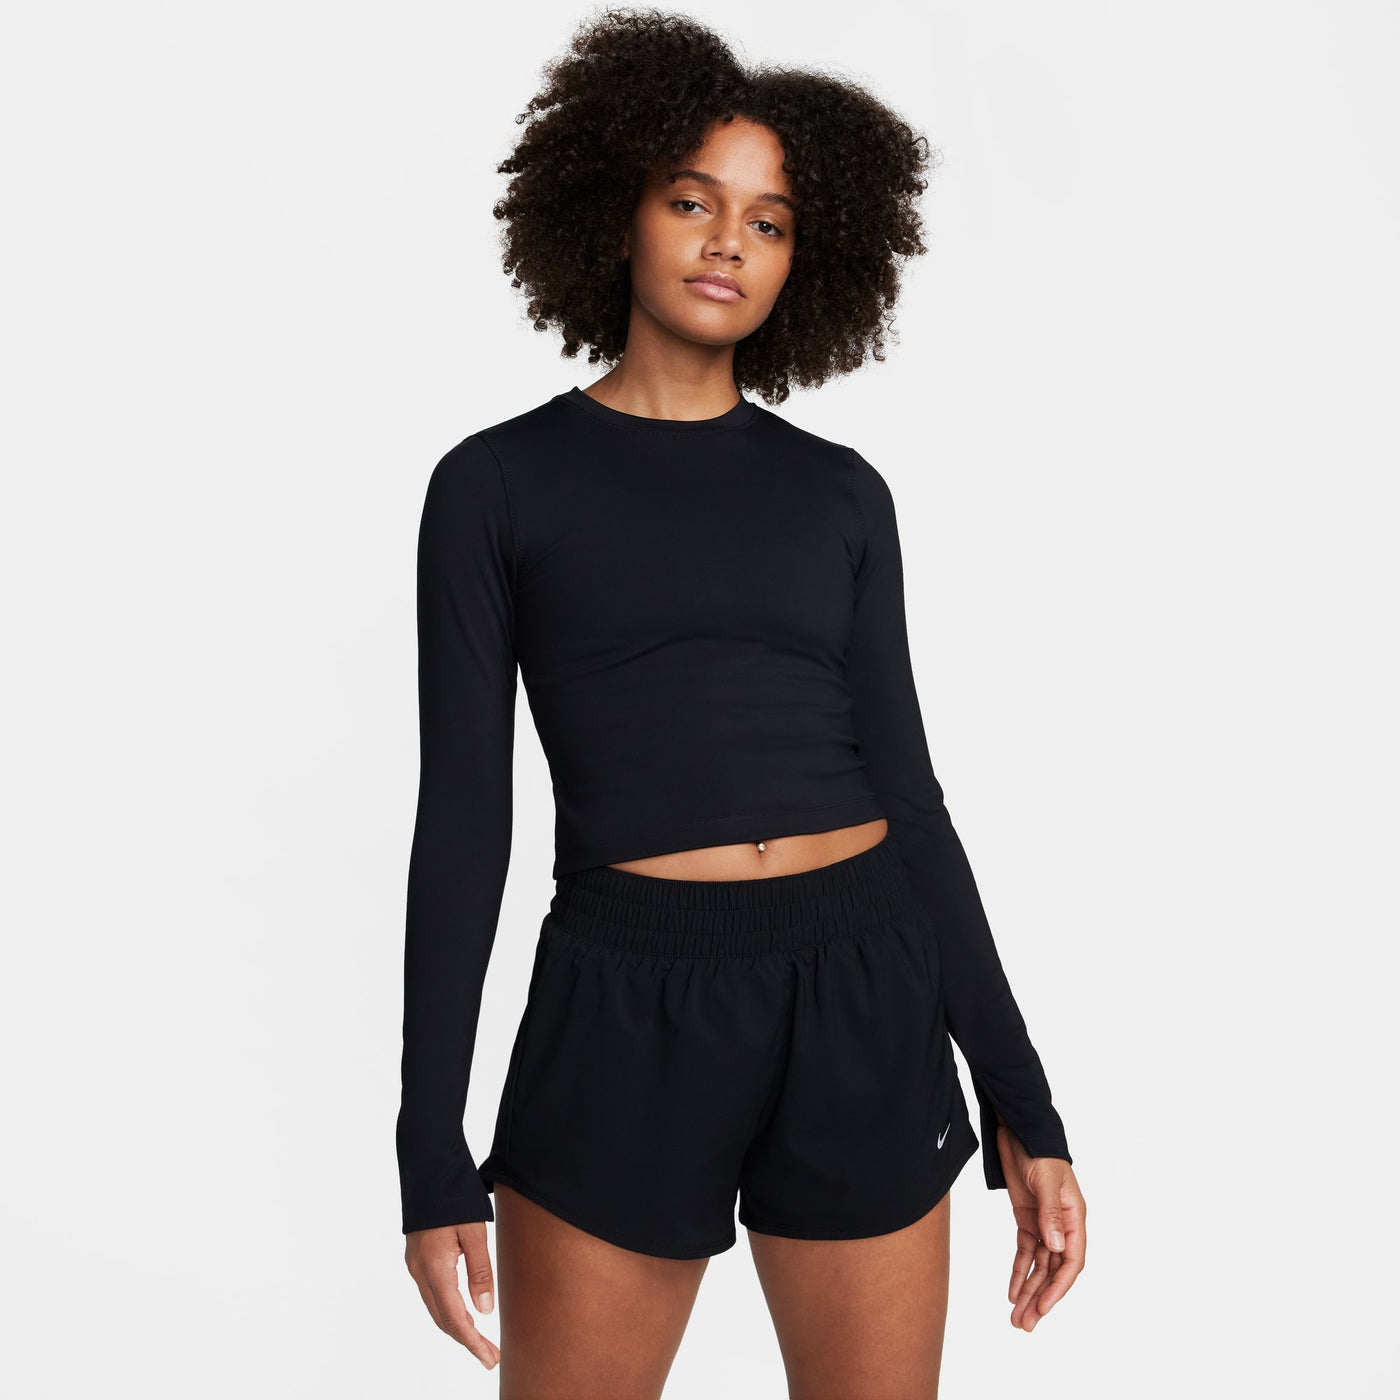 Women's Nike One Fitted Long Sleeve Top - FQ2148-010